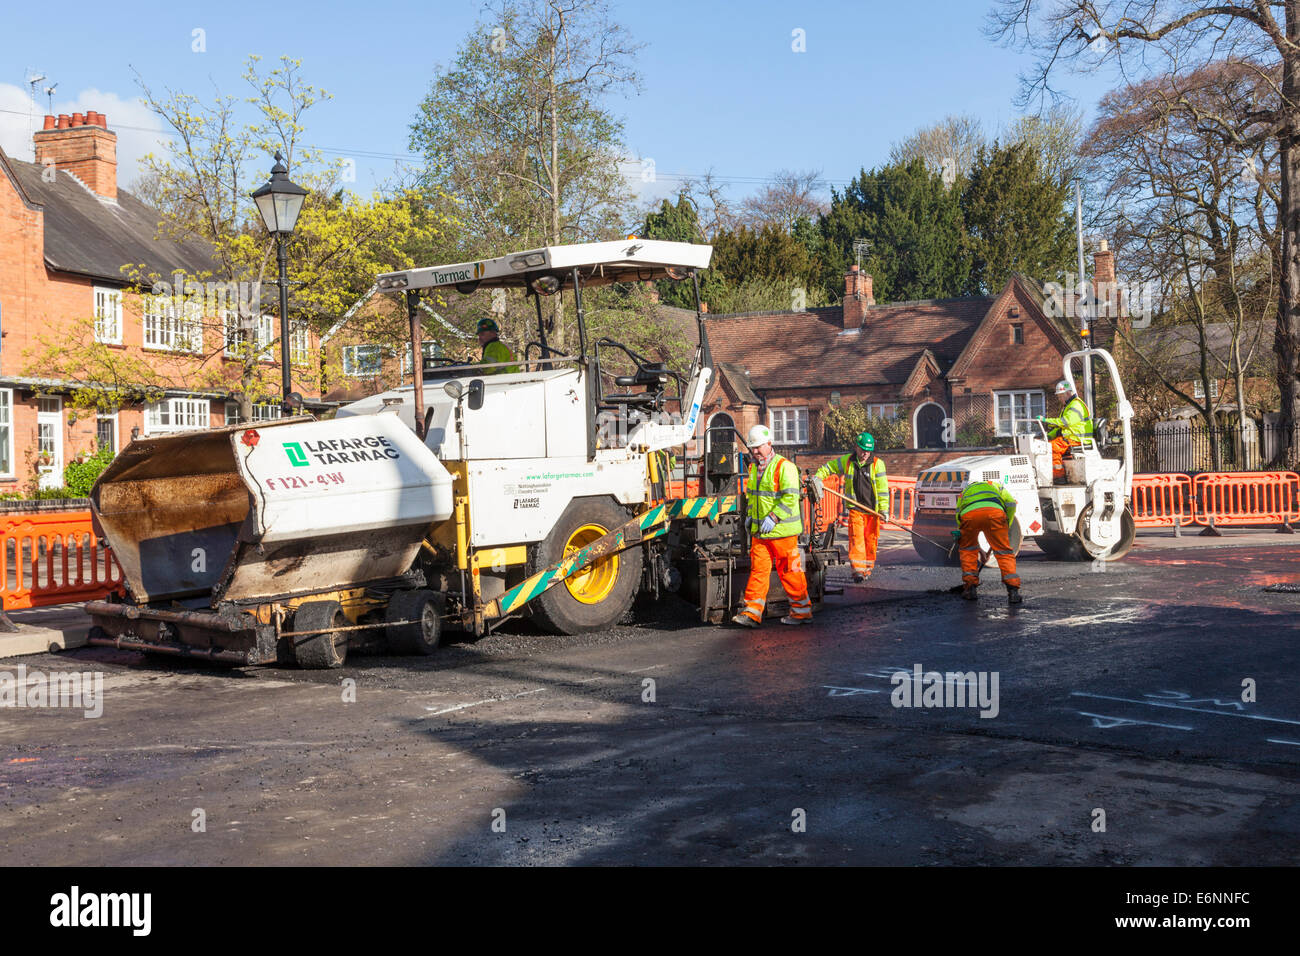 Road works. Road workers with a paver and road roller during resurfacing roadworks, Ruddington, Nottinghamshire, England, UK Stock Photo